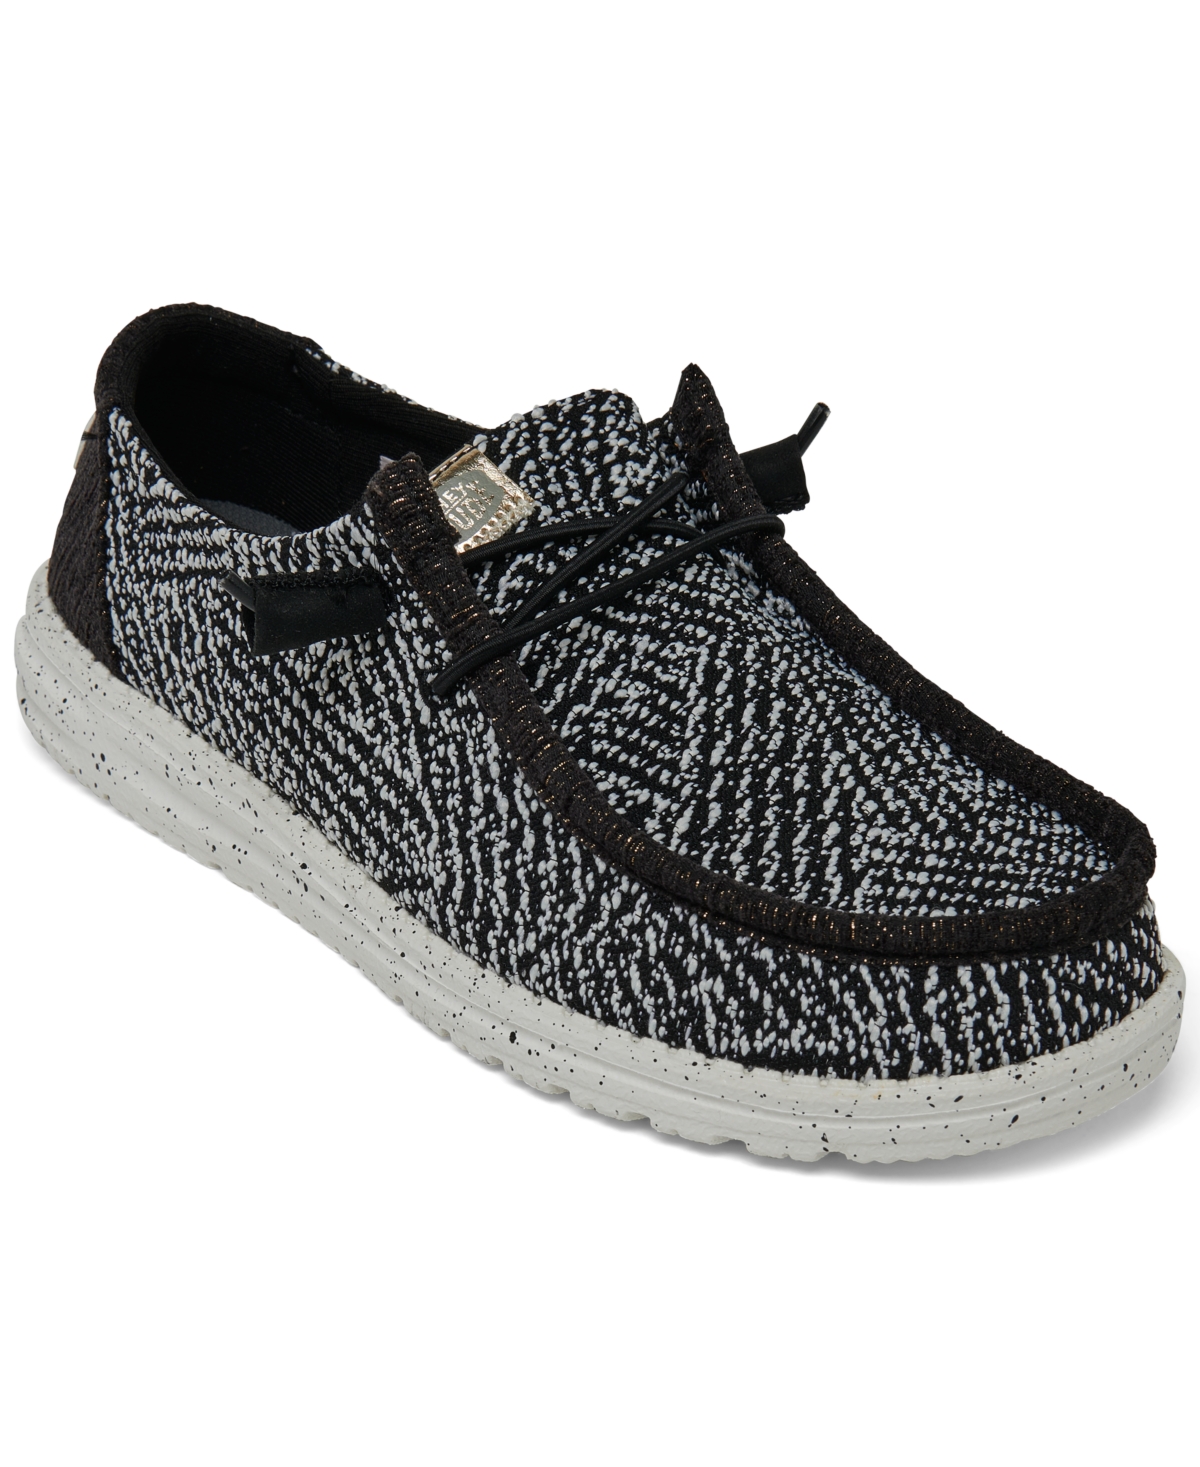 Women's Wendy Woven Zig Zag Casual Moccasin Sneakers from Finish Line - Black